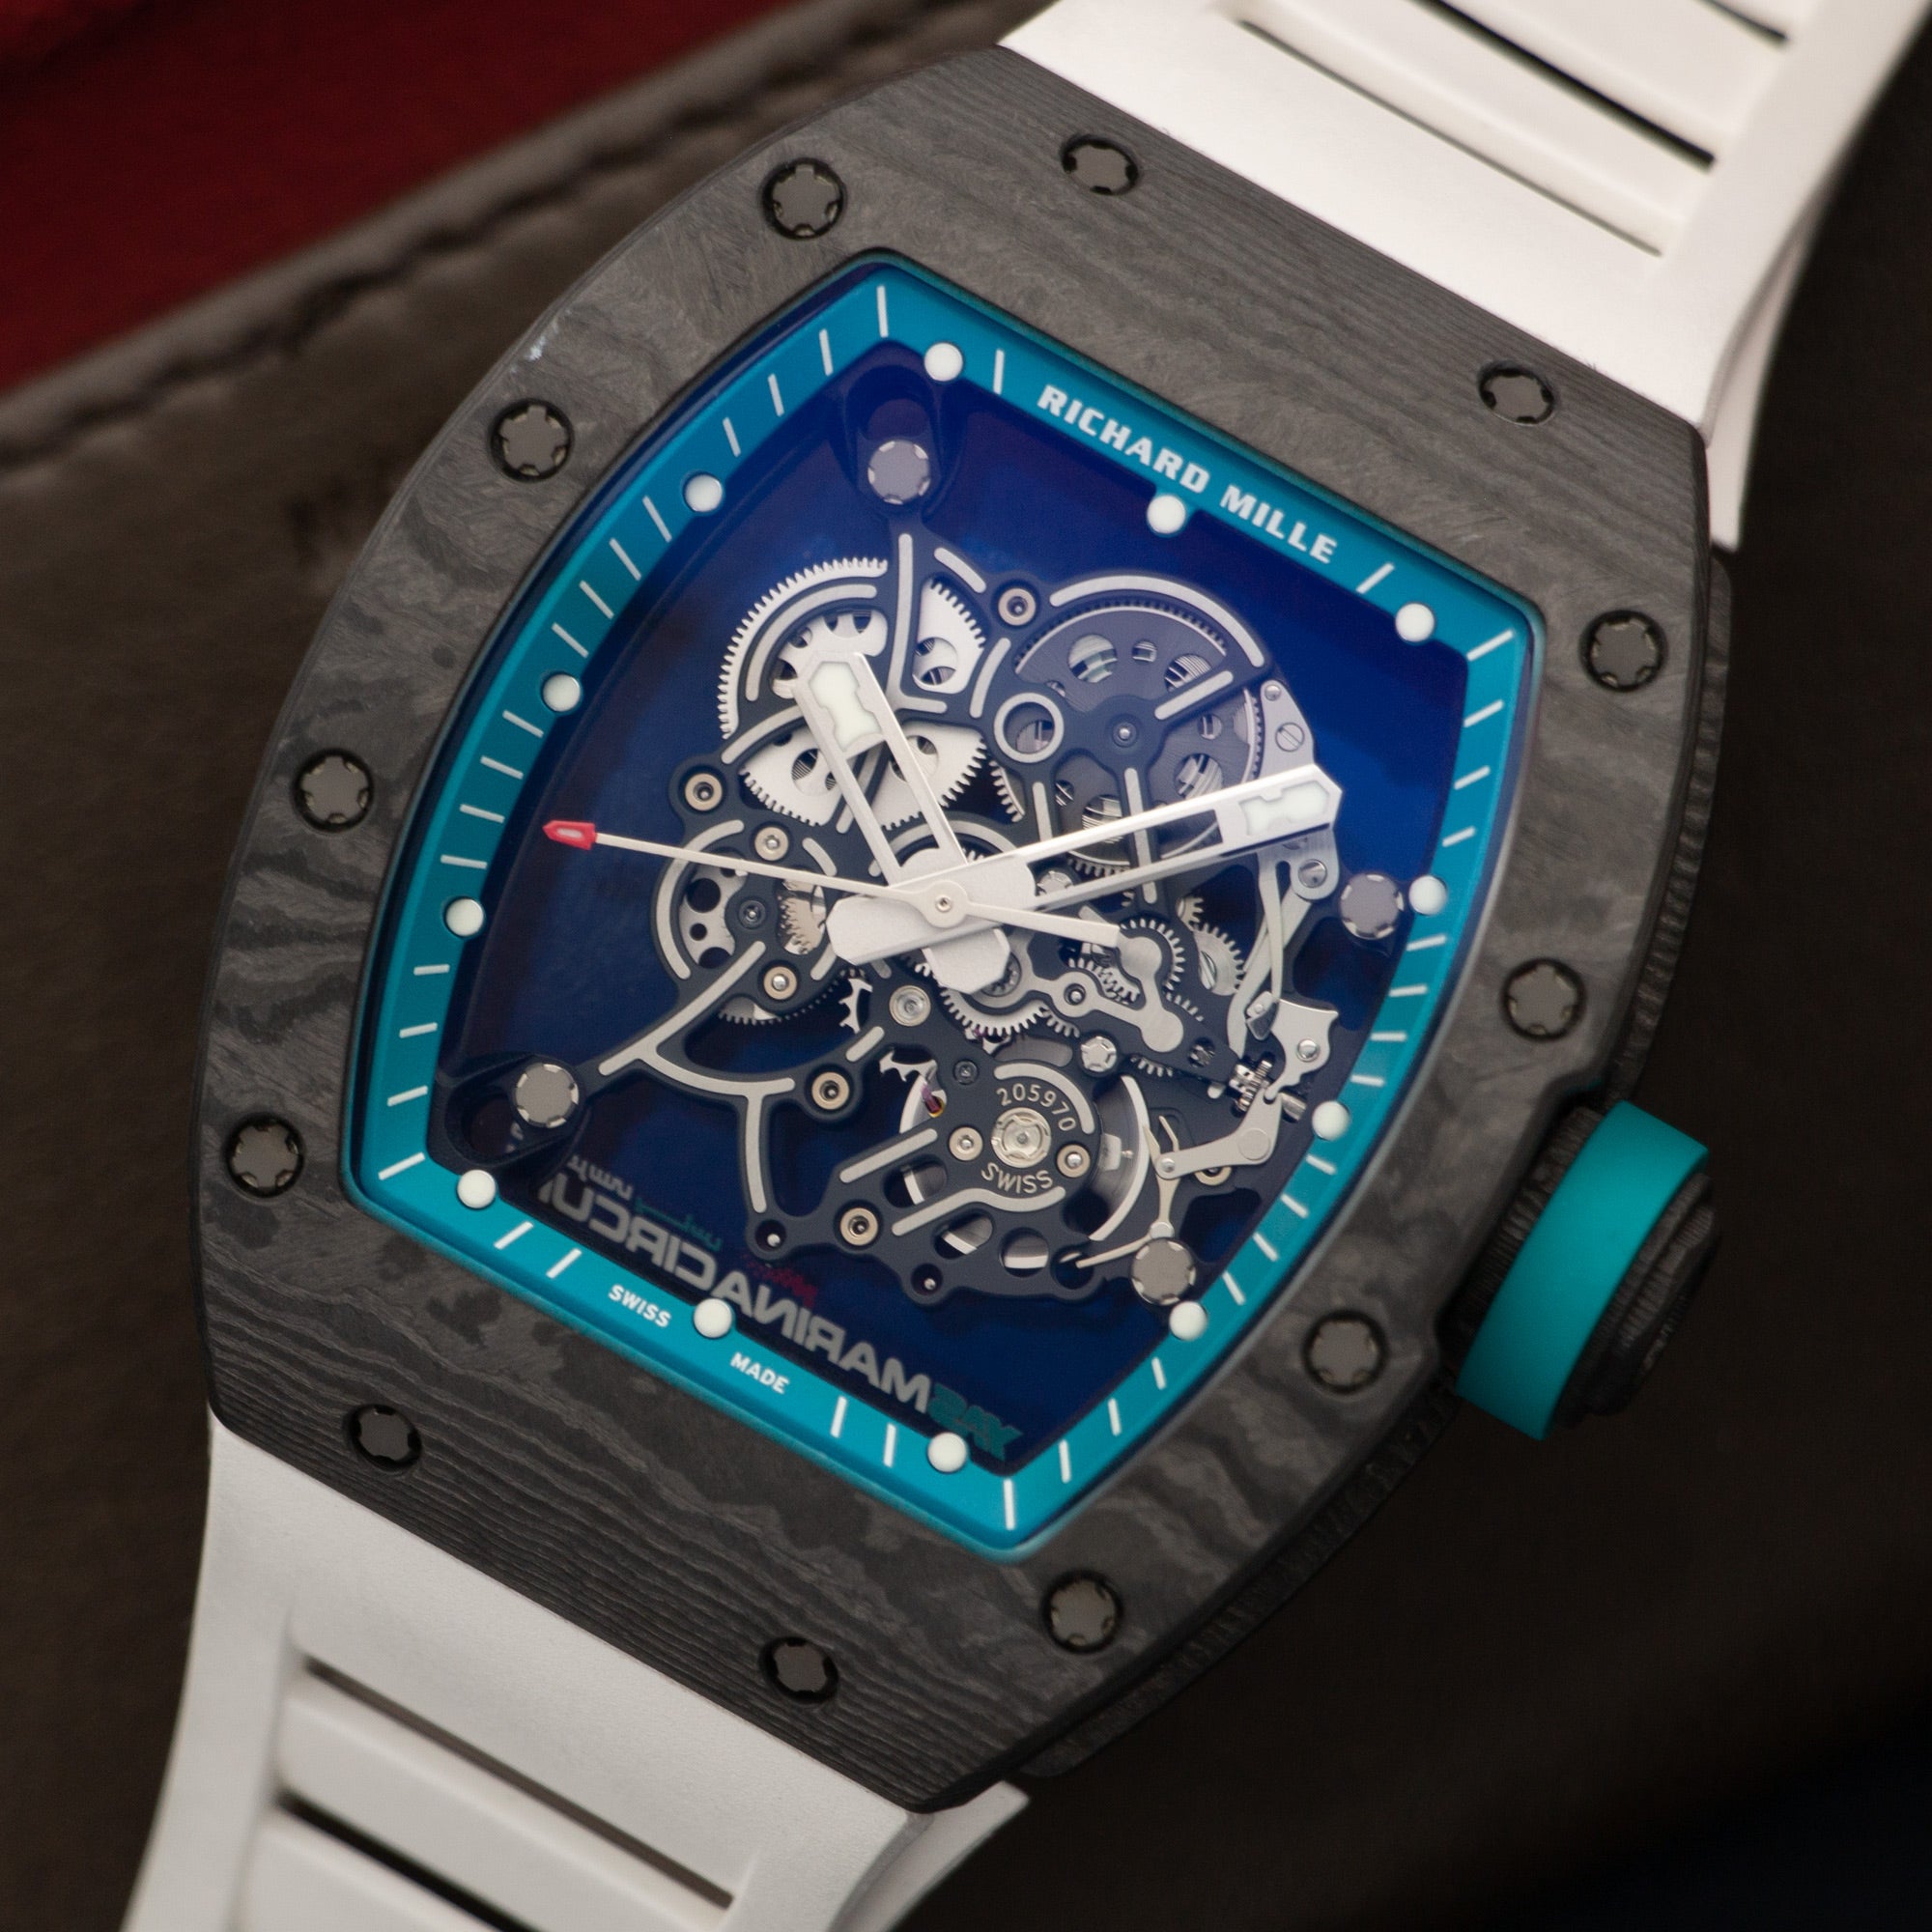 Richard Mille - Richard Mille Carbon Yas Marina Circuit Watch Ref. RM055 - The Keystone Watches